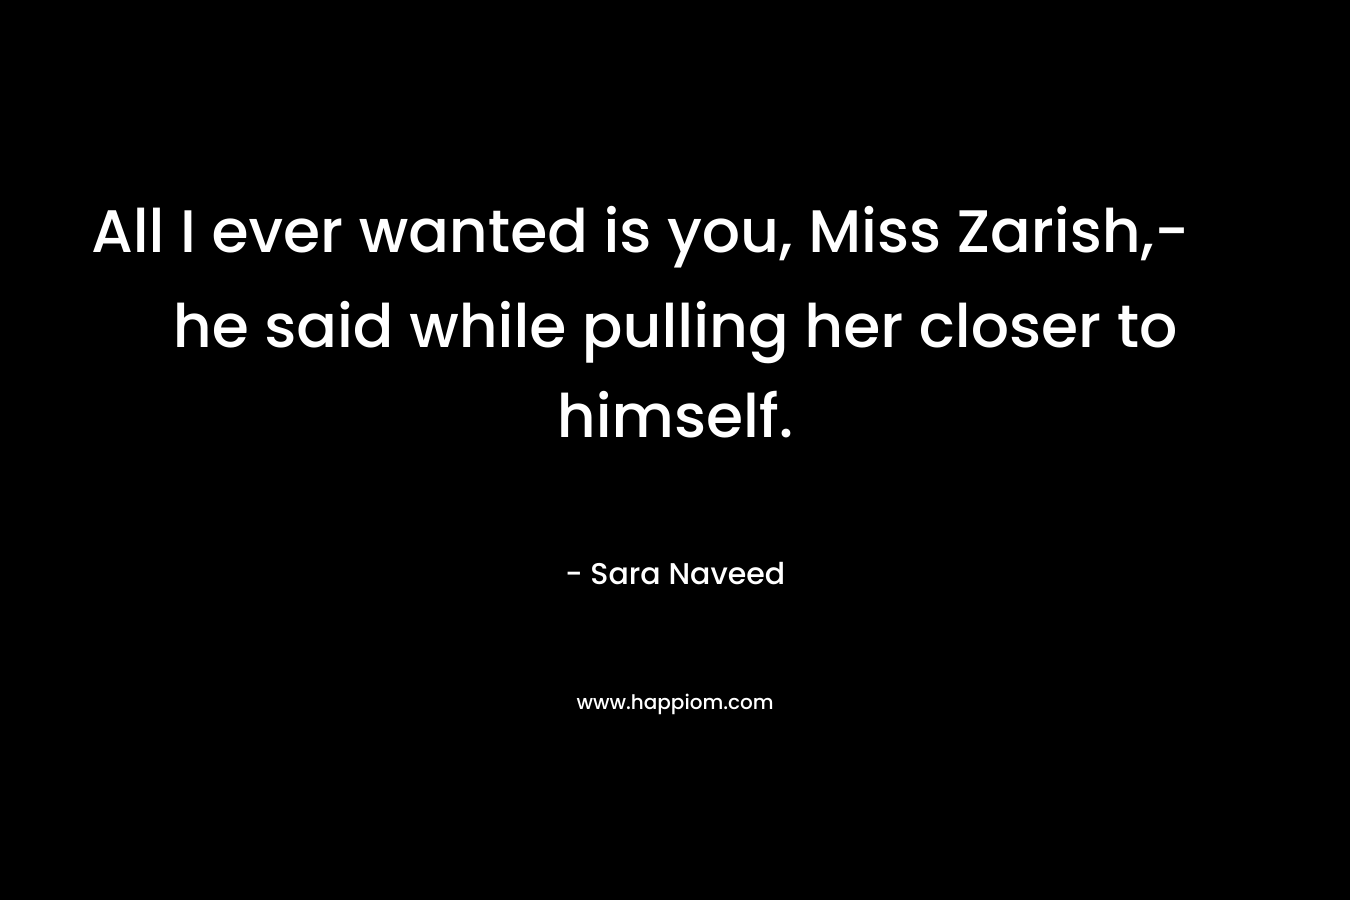 All I ever wanted is you, Miss Zarish,- he said while pulling her closer to himself.